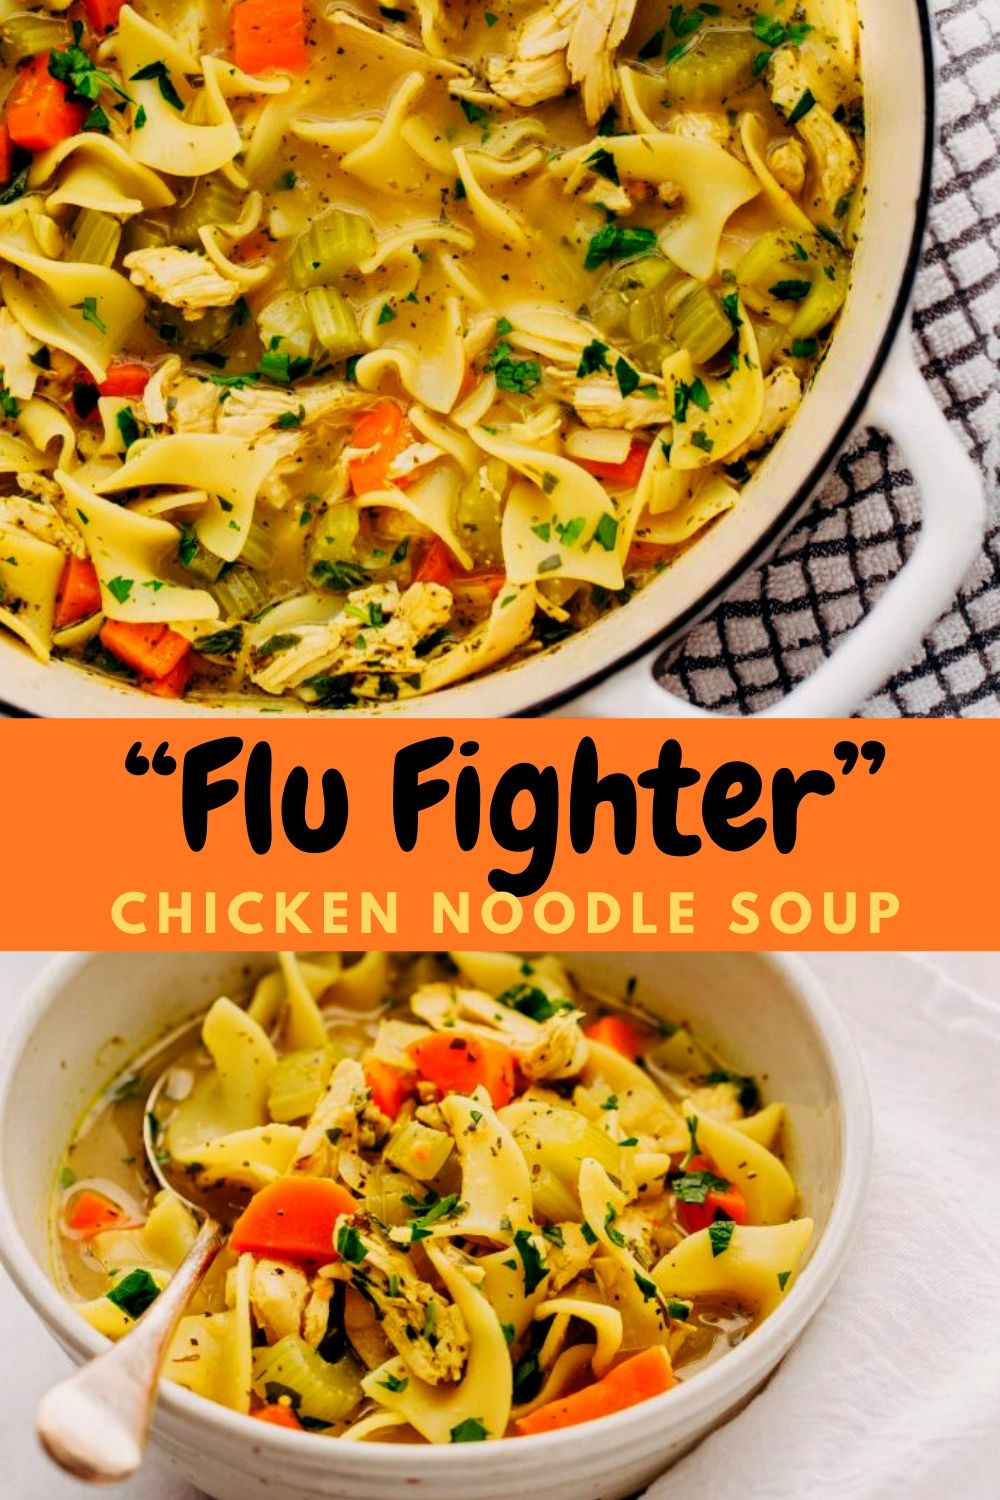 “Flu Fighter” Chicken Noodle Soup | New Recipe 4